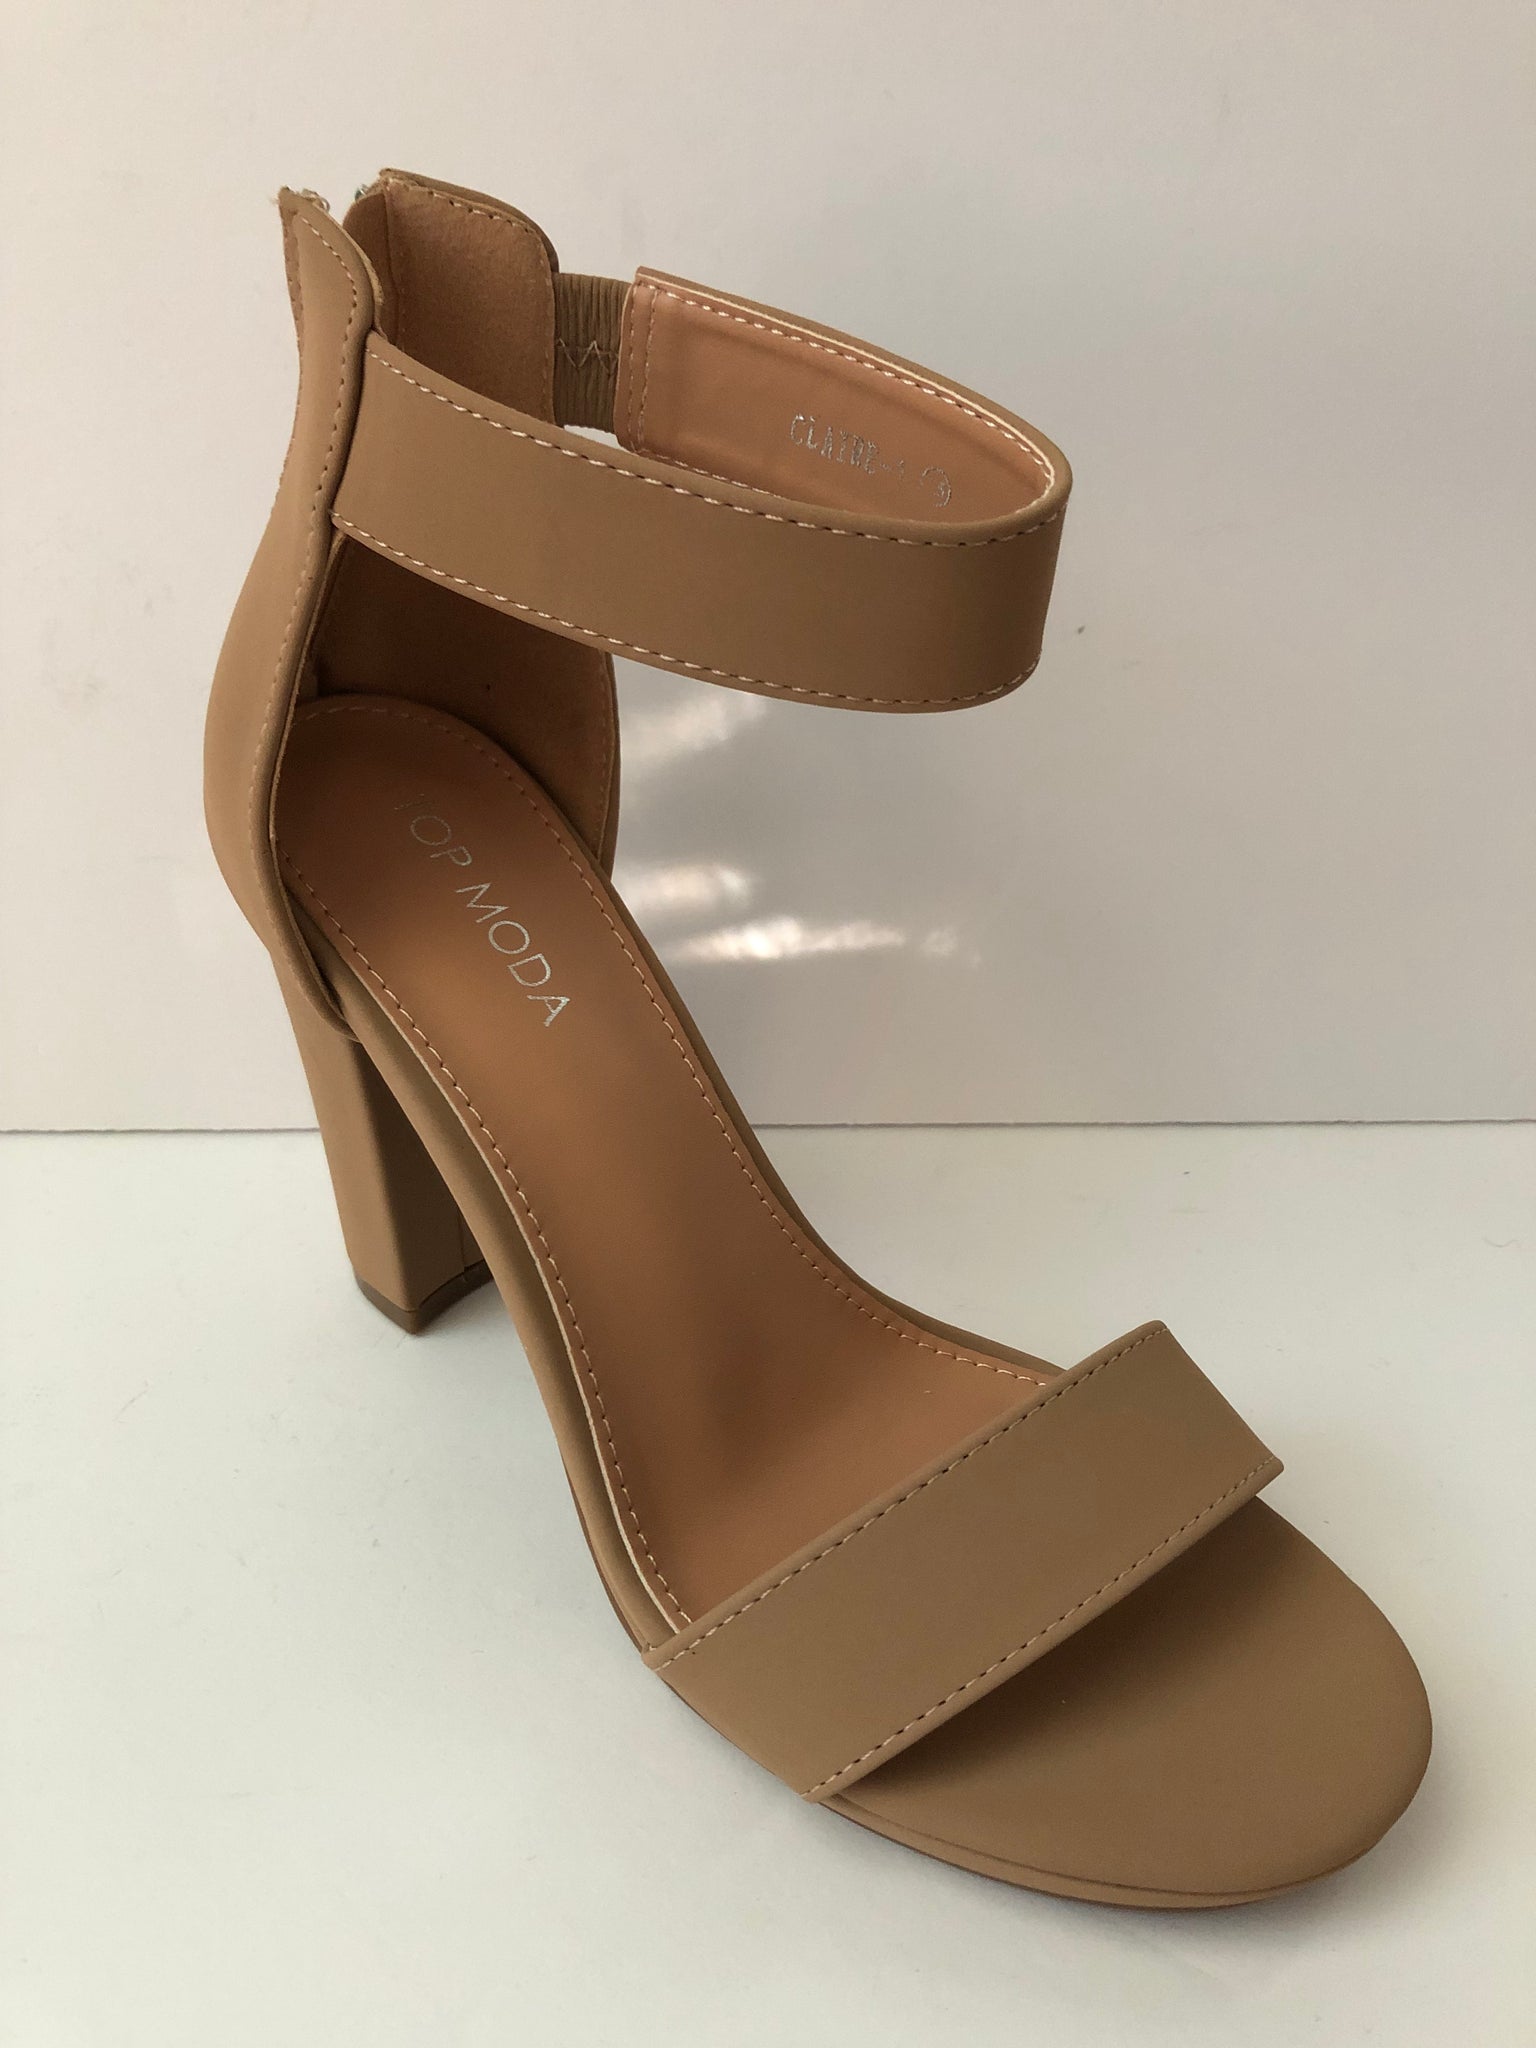 Where's That From Clara High Heels With Buckle Ankle Strap - Chocolate Brown  in Natural | Lyst UK